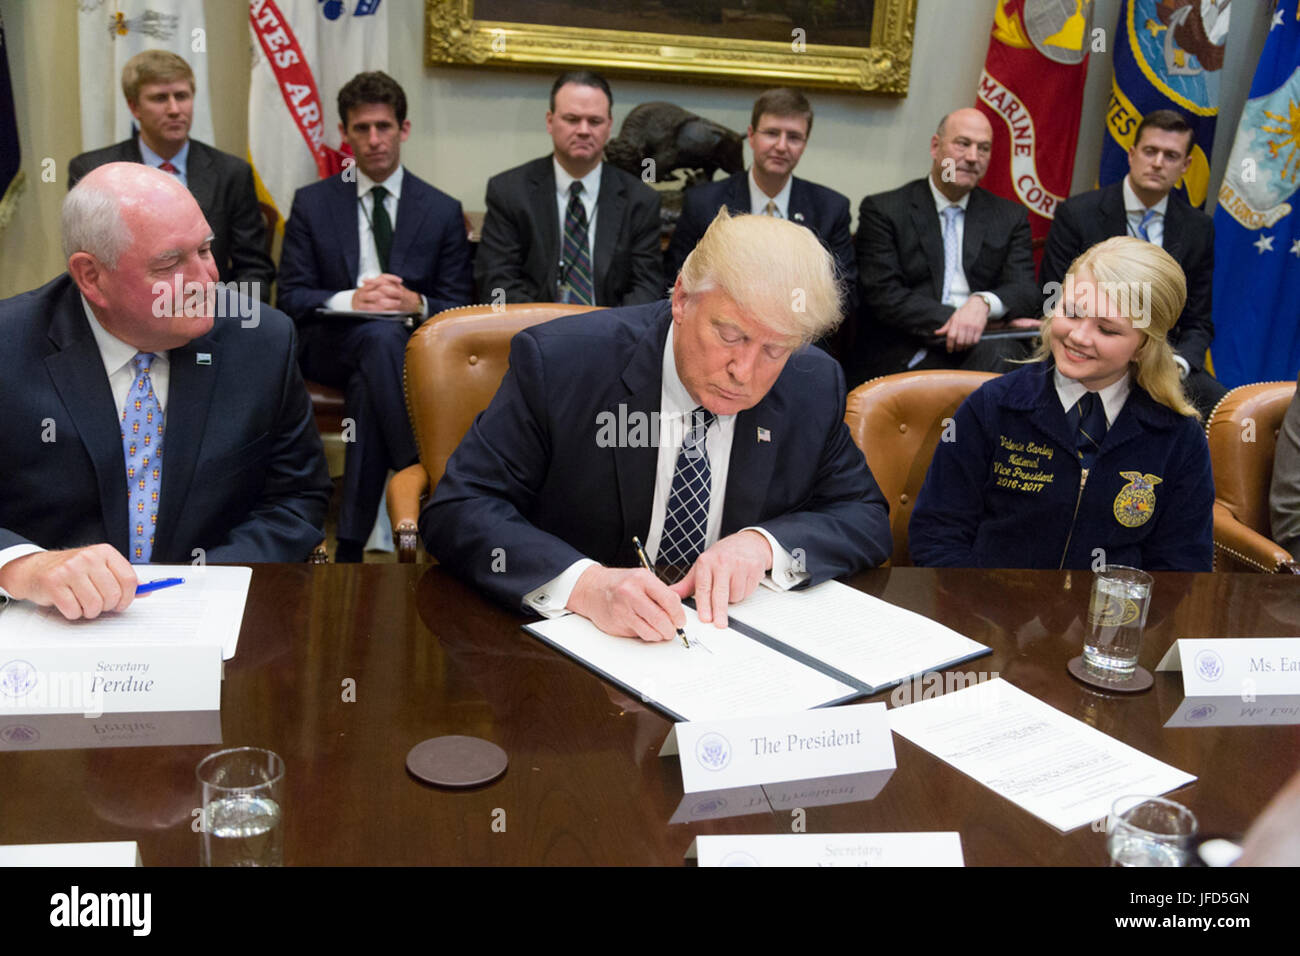 U.S. Secretary of Agriculture Sonny Perdue and Valerie Earley, Vice President of the National FFA Central Region, look on as President Donald Trump signs an Executive Order promoting Agriculture and Rural Prosperity in America in the Roosevelt Room of the White House in Washington, D.C., Tuesday, April 25, 2017. (Official White House Photo by Shealah Craighead) Stock Photo